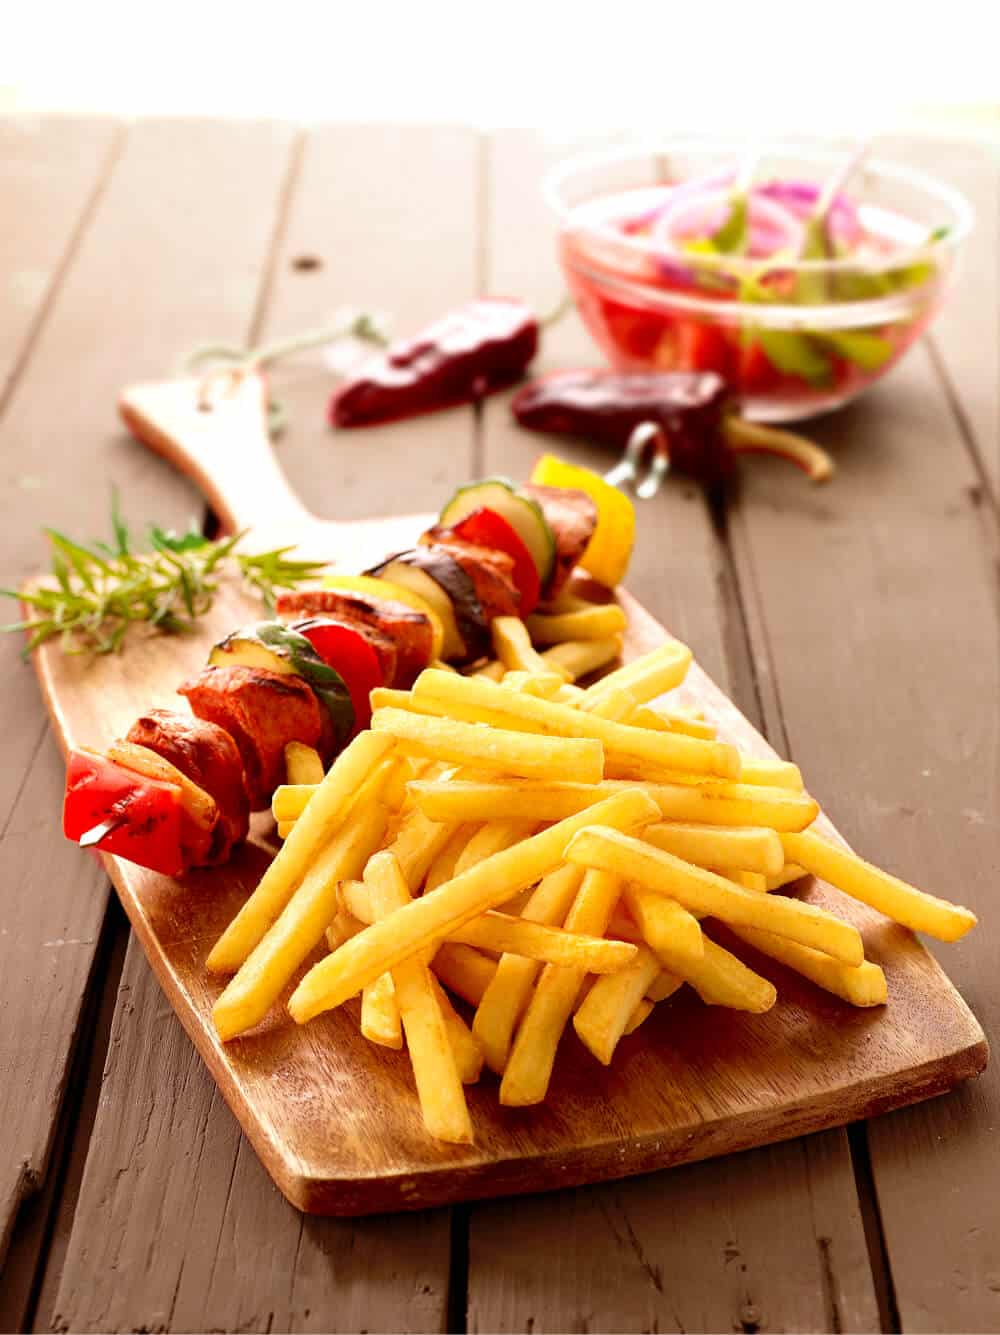 10 10 bbq skewer - Make your Chilled Choice